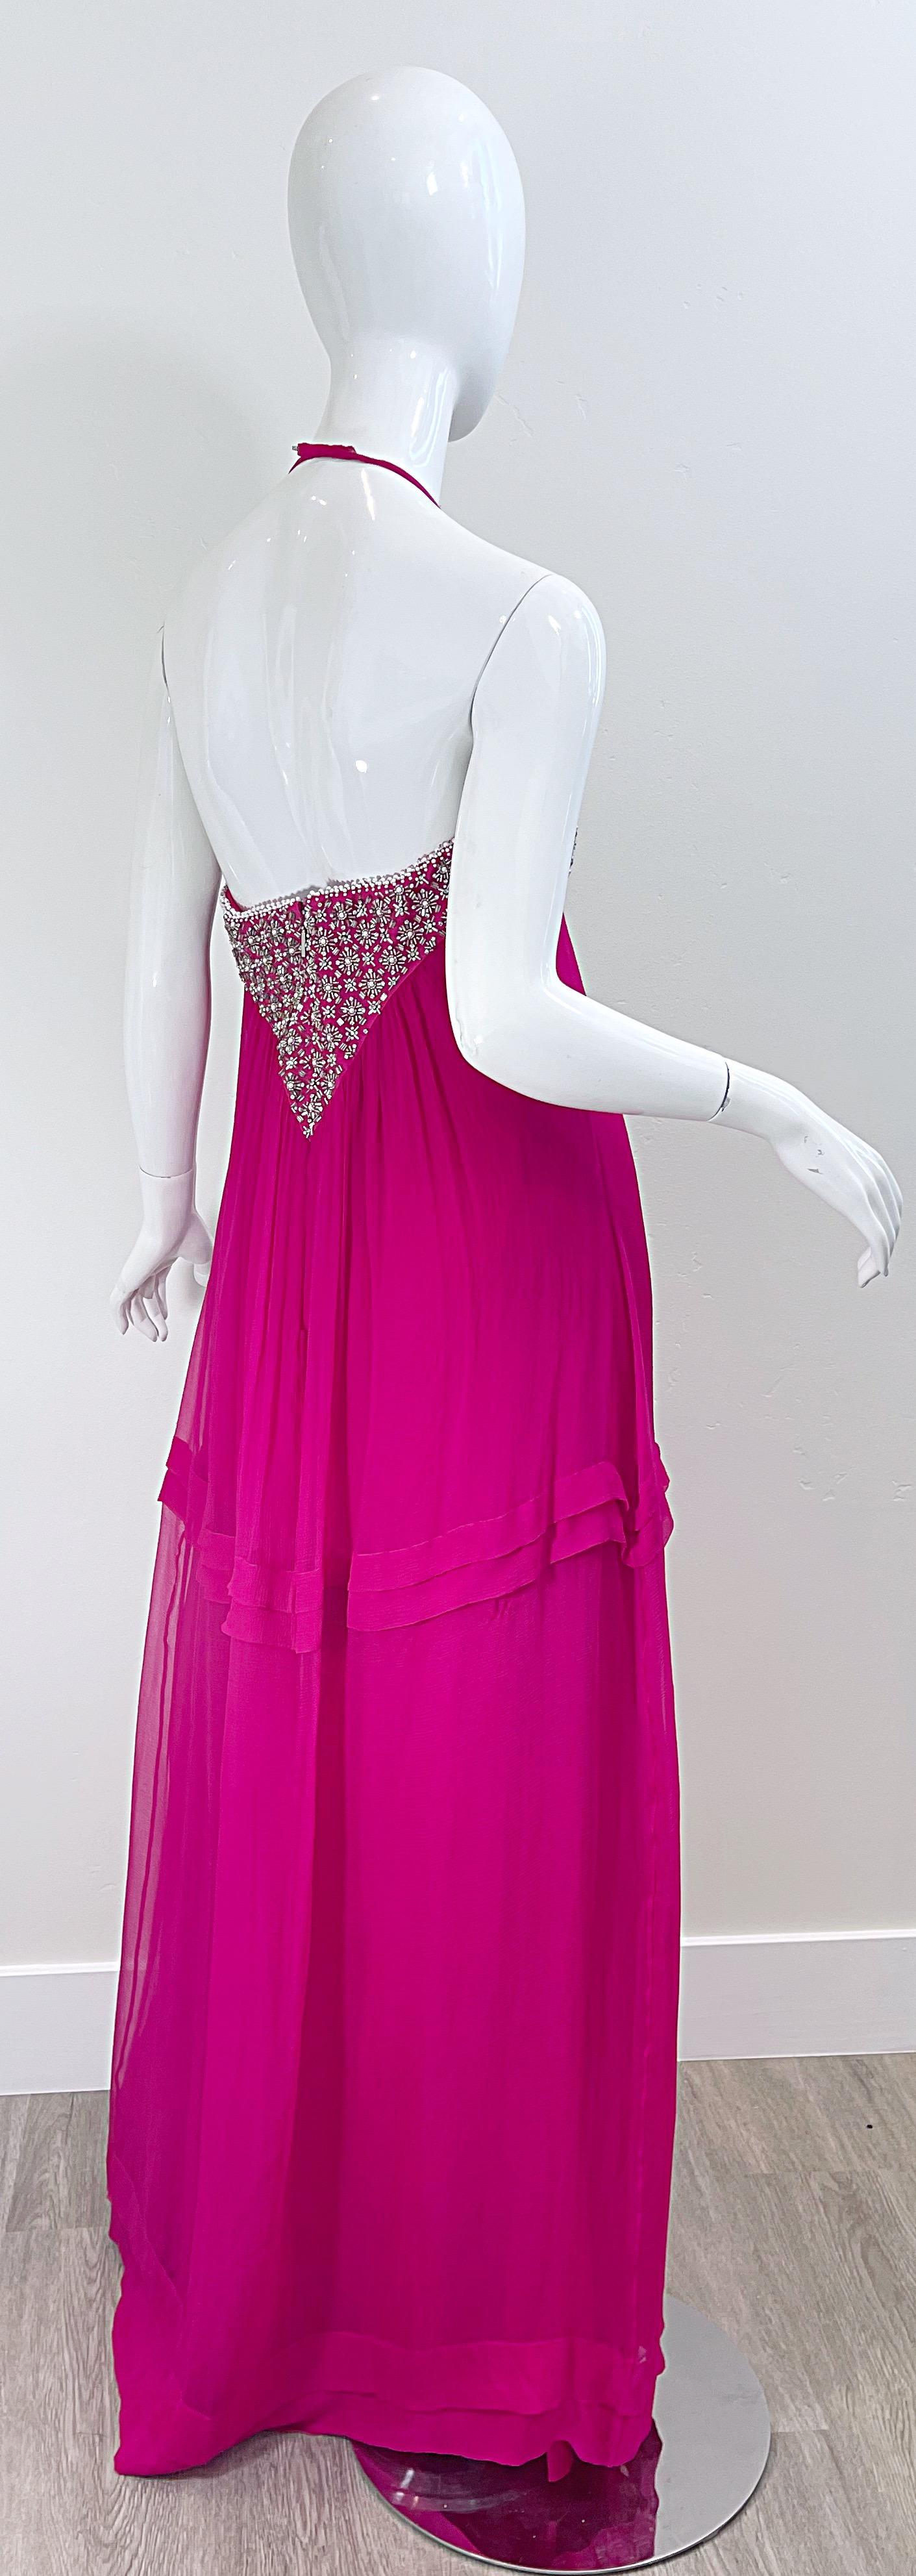 1990s Roberto Cavalli Size 44 / US 8 Hot Pink Chiffon Beaded Rhinestone 90s Gown For Sale 8